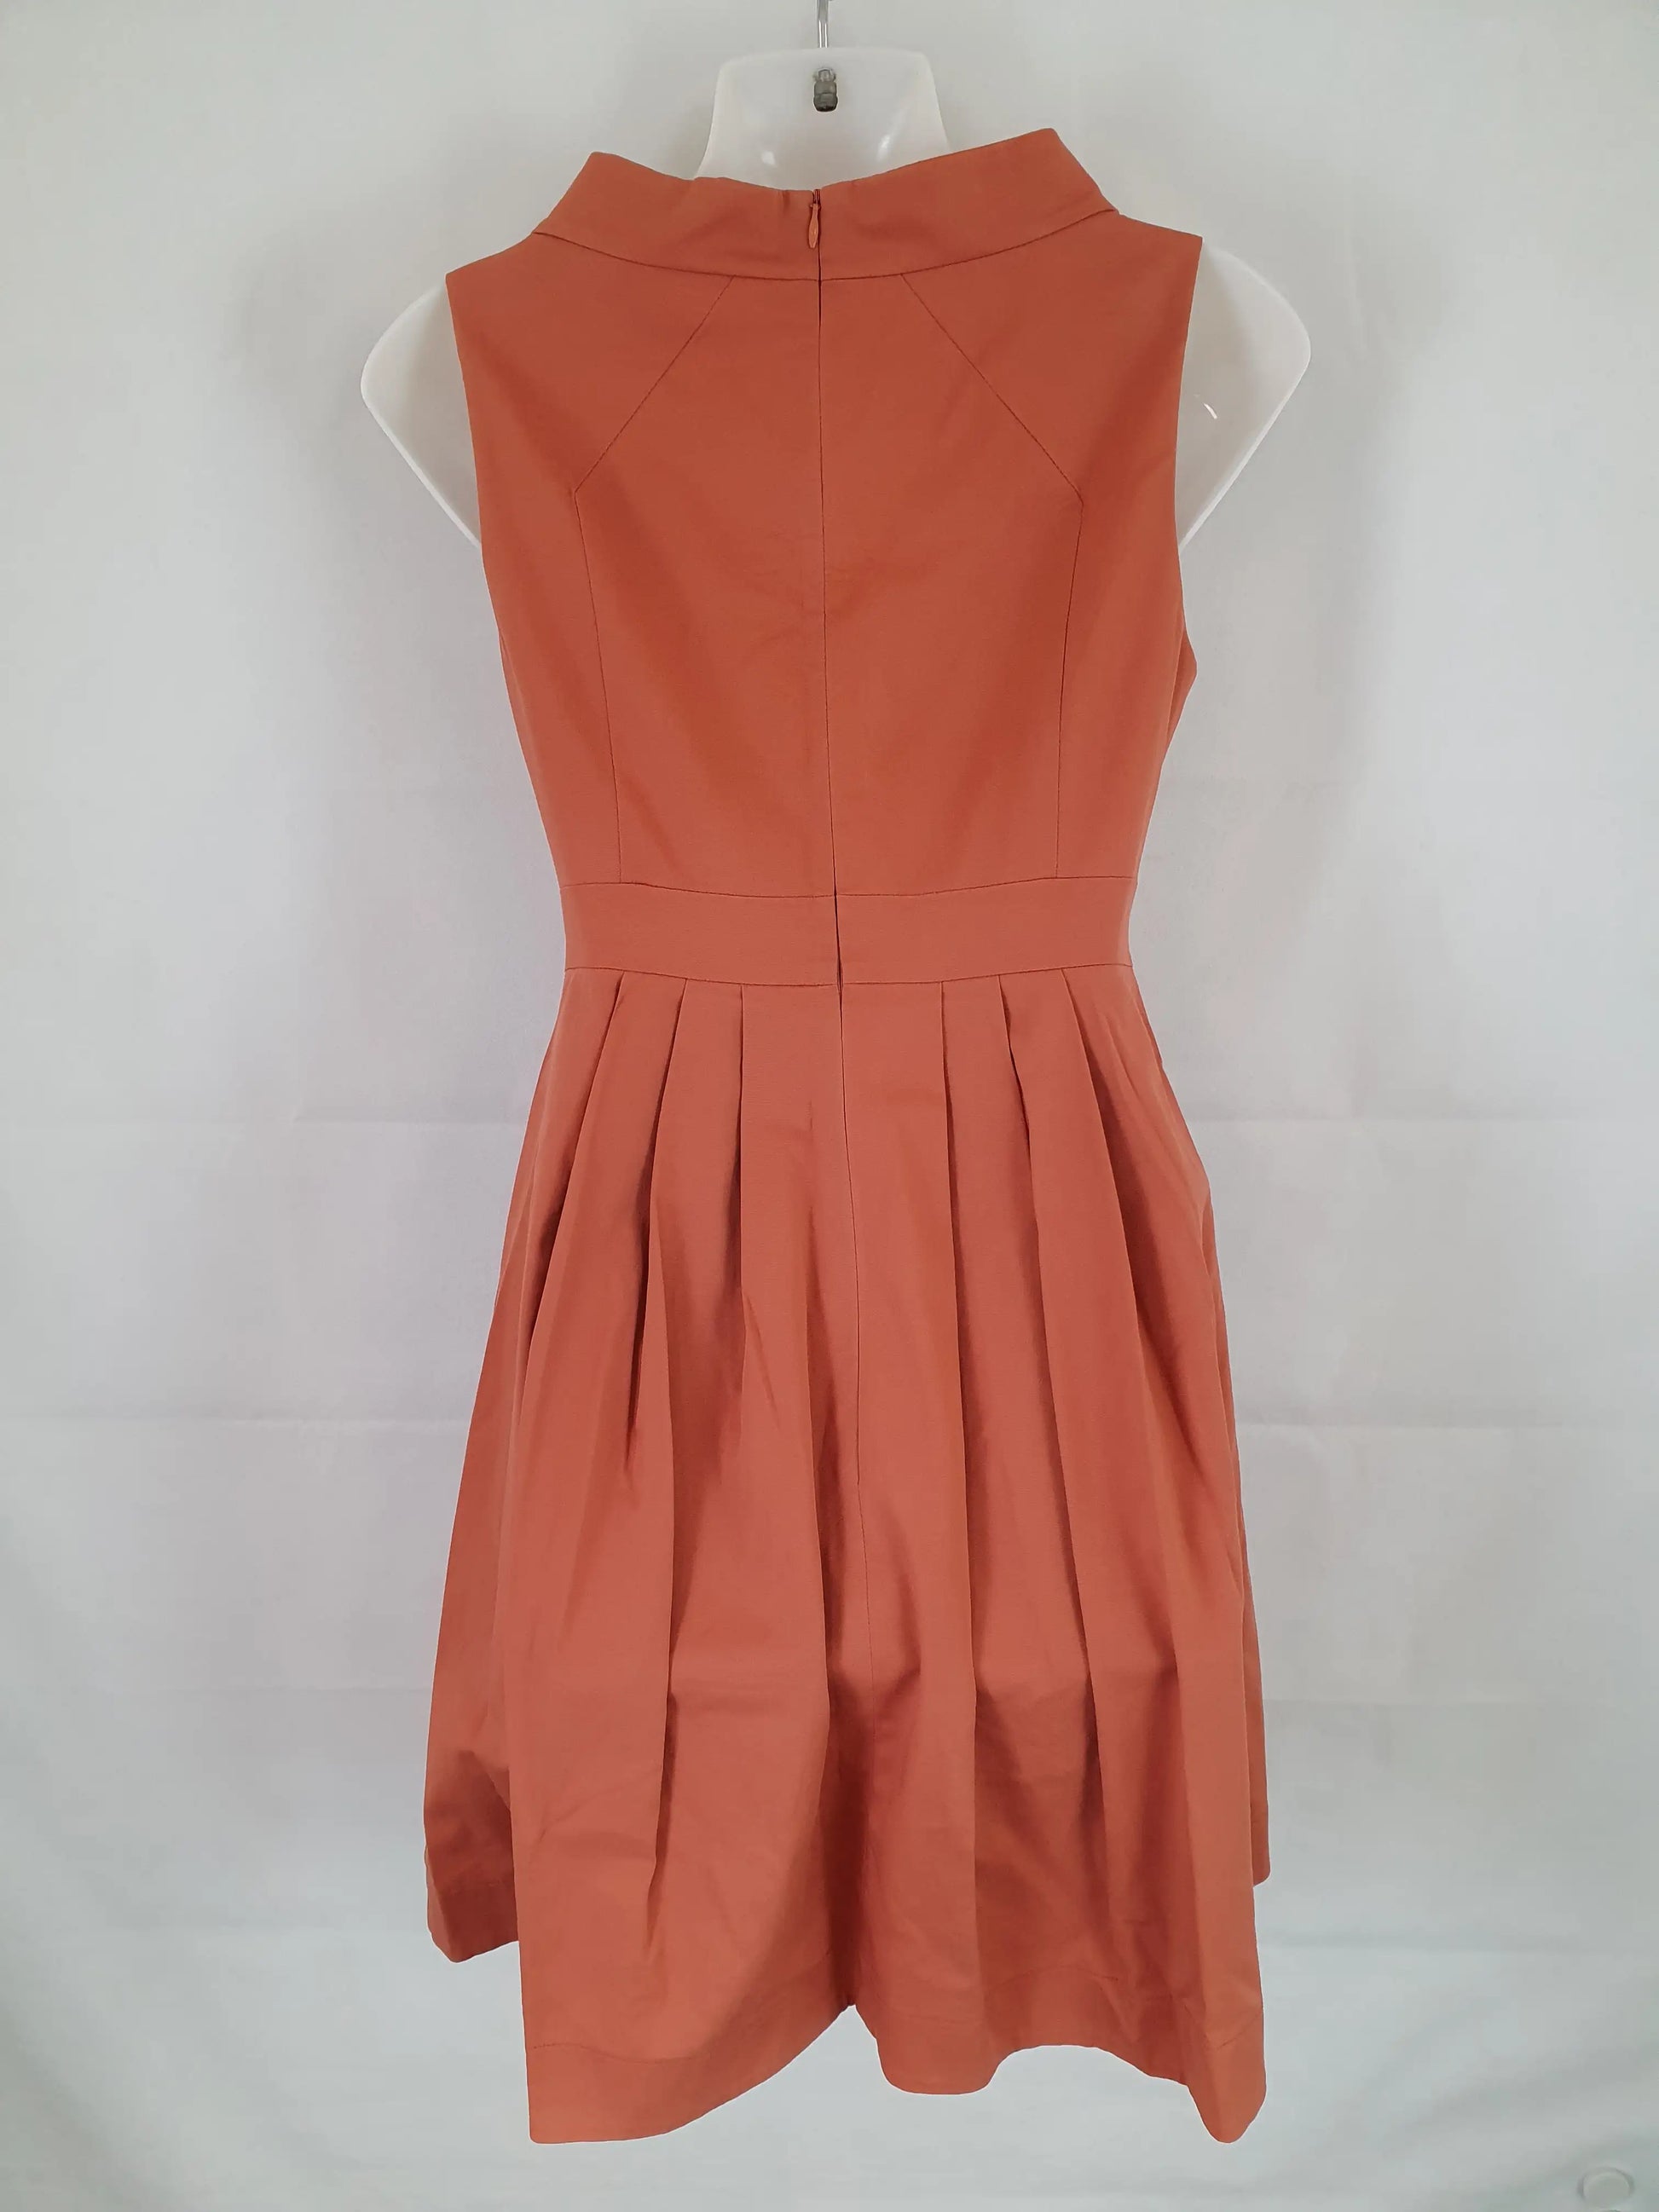 Cue High Neck Sunset Office Midi Dress Size 6 by SwapUp-Second Hand Shop-Thrift Store-Op Shop 